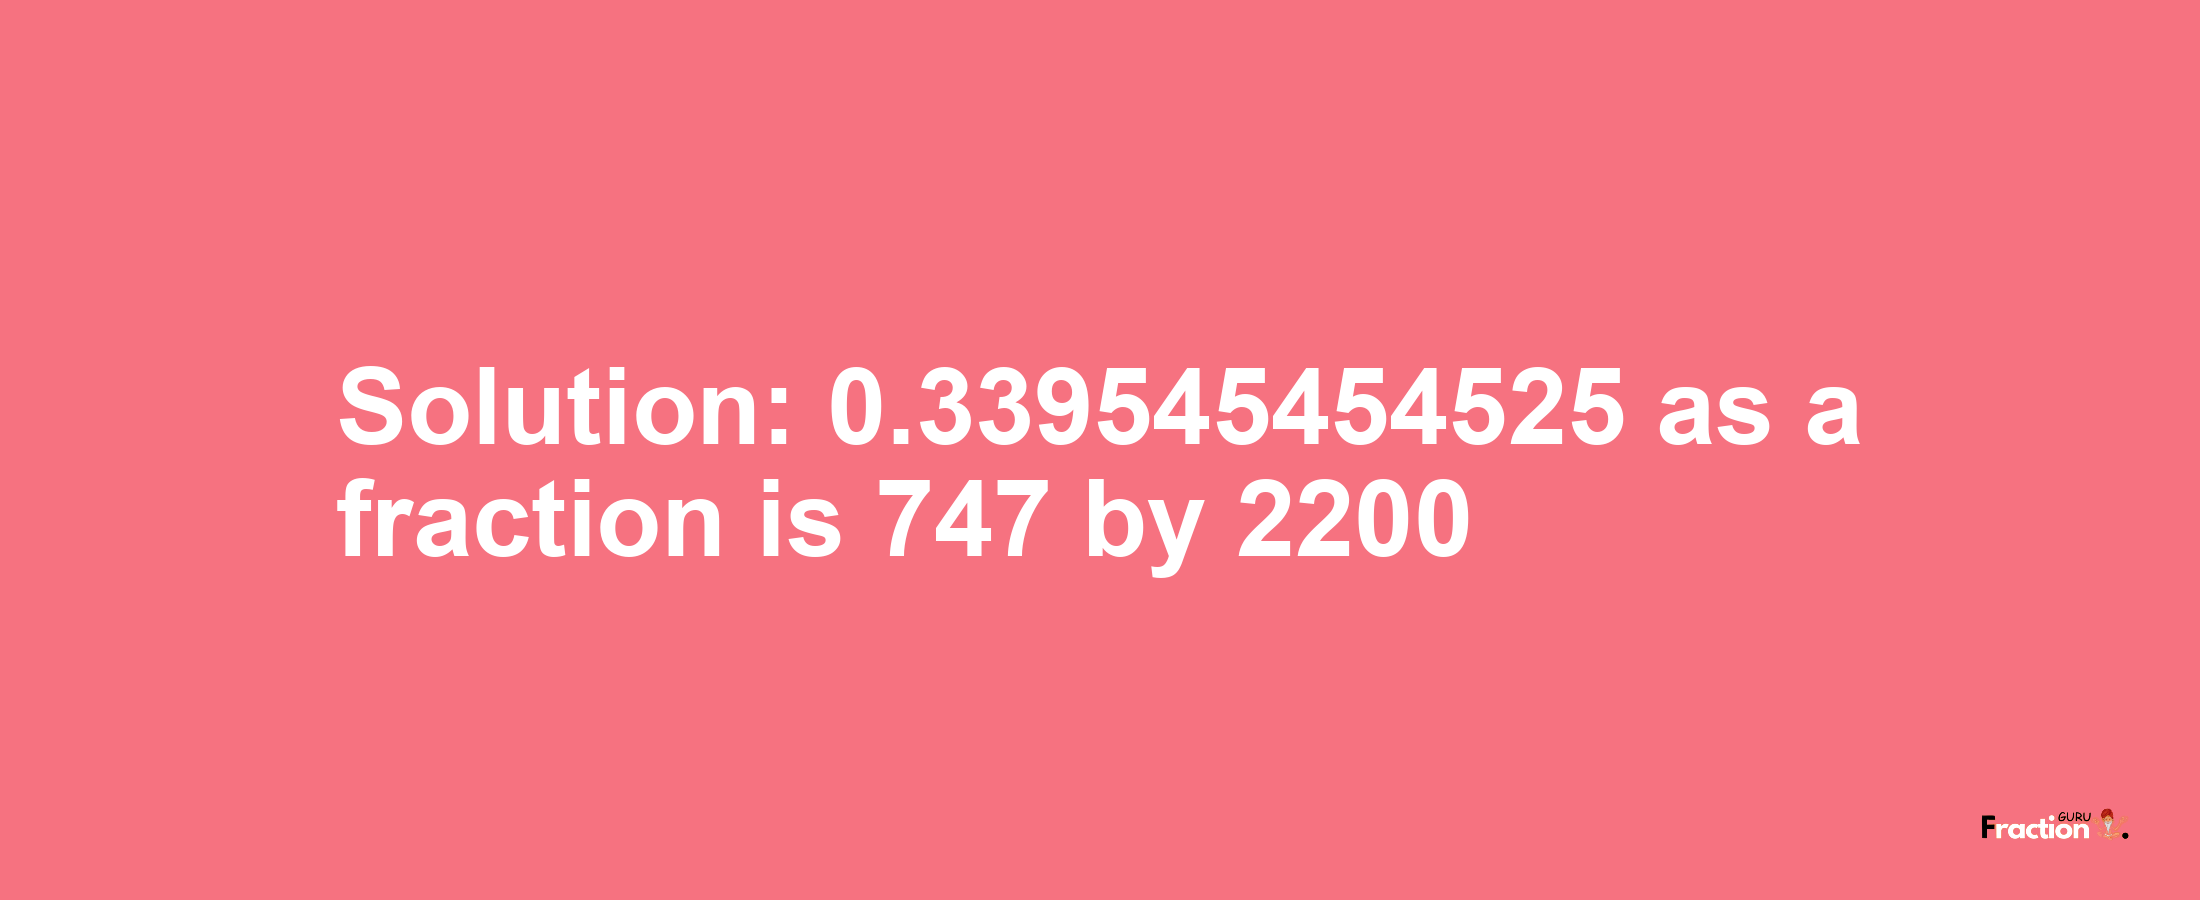 Solution:0.339545454525 as a fraction is 747/2200